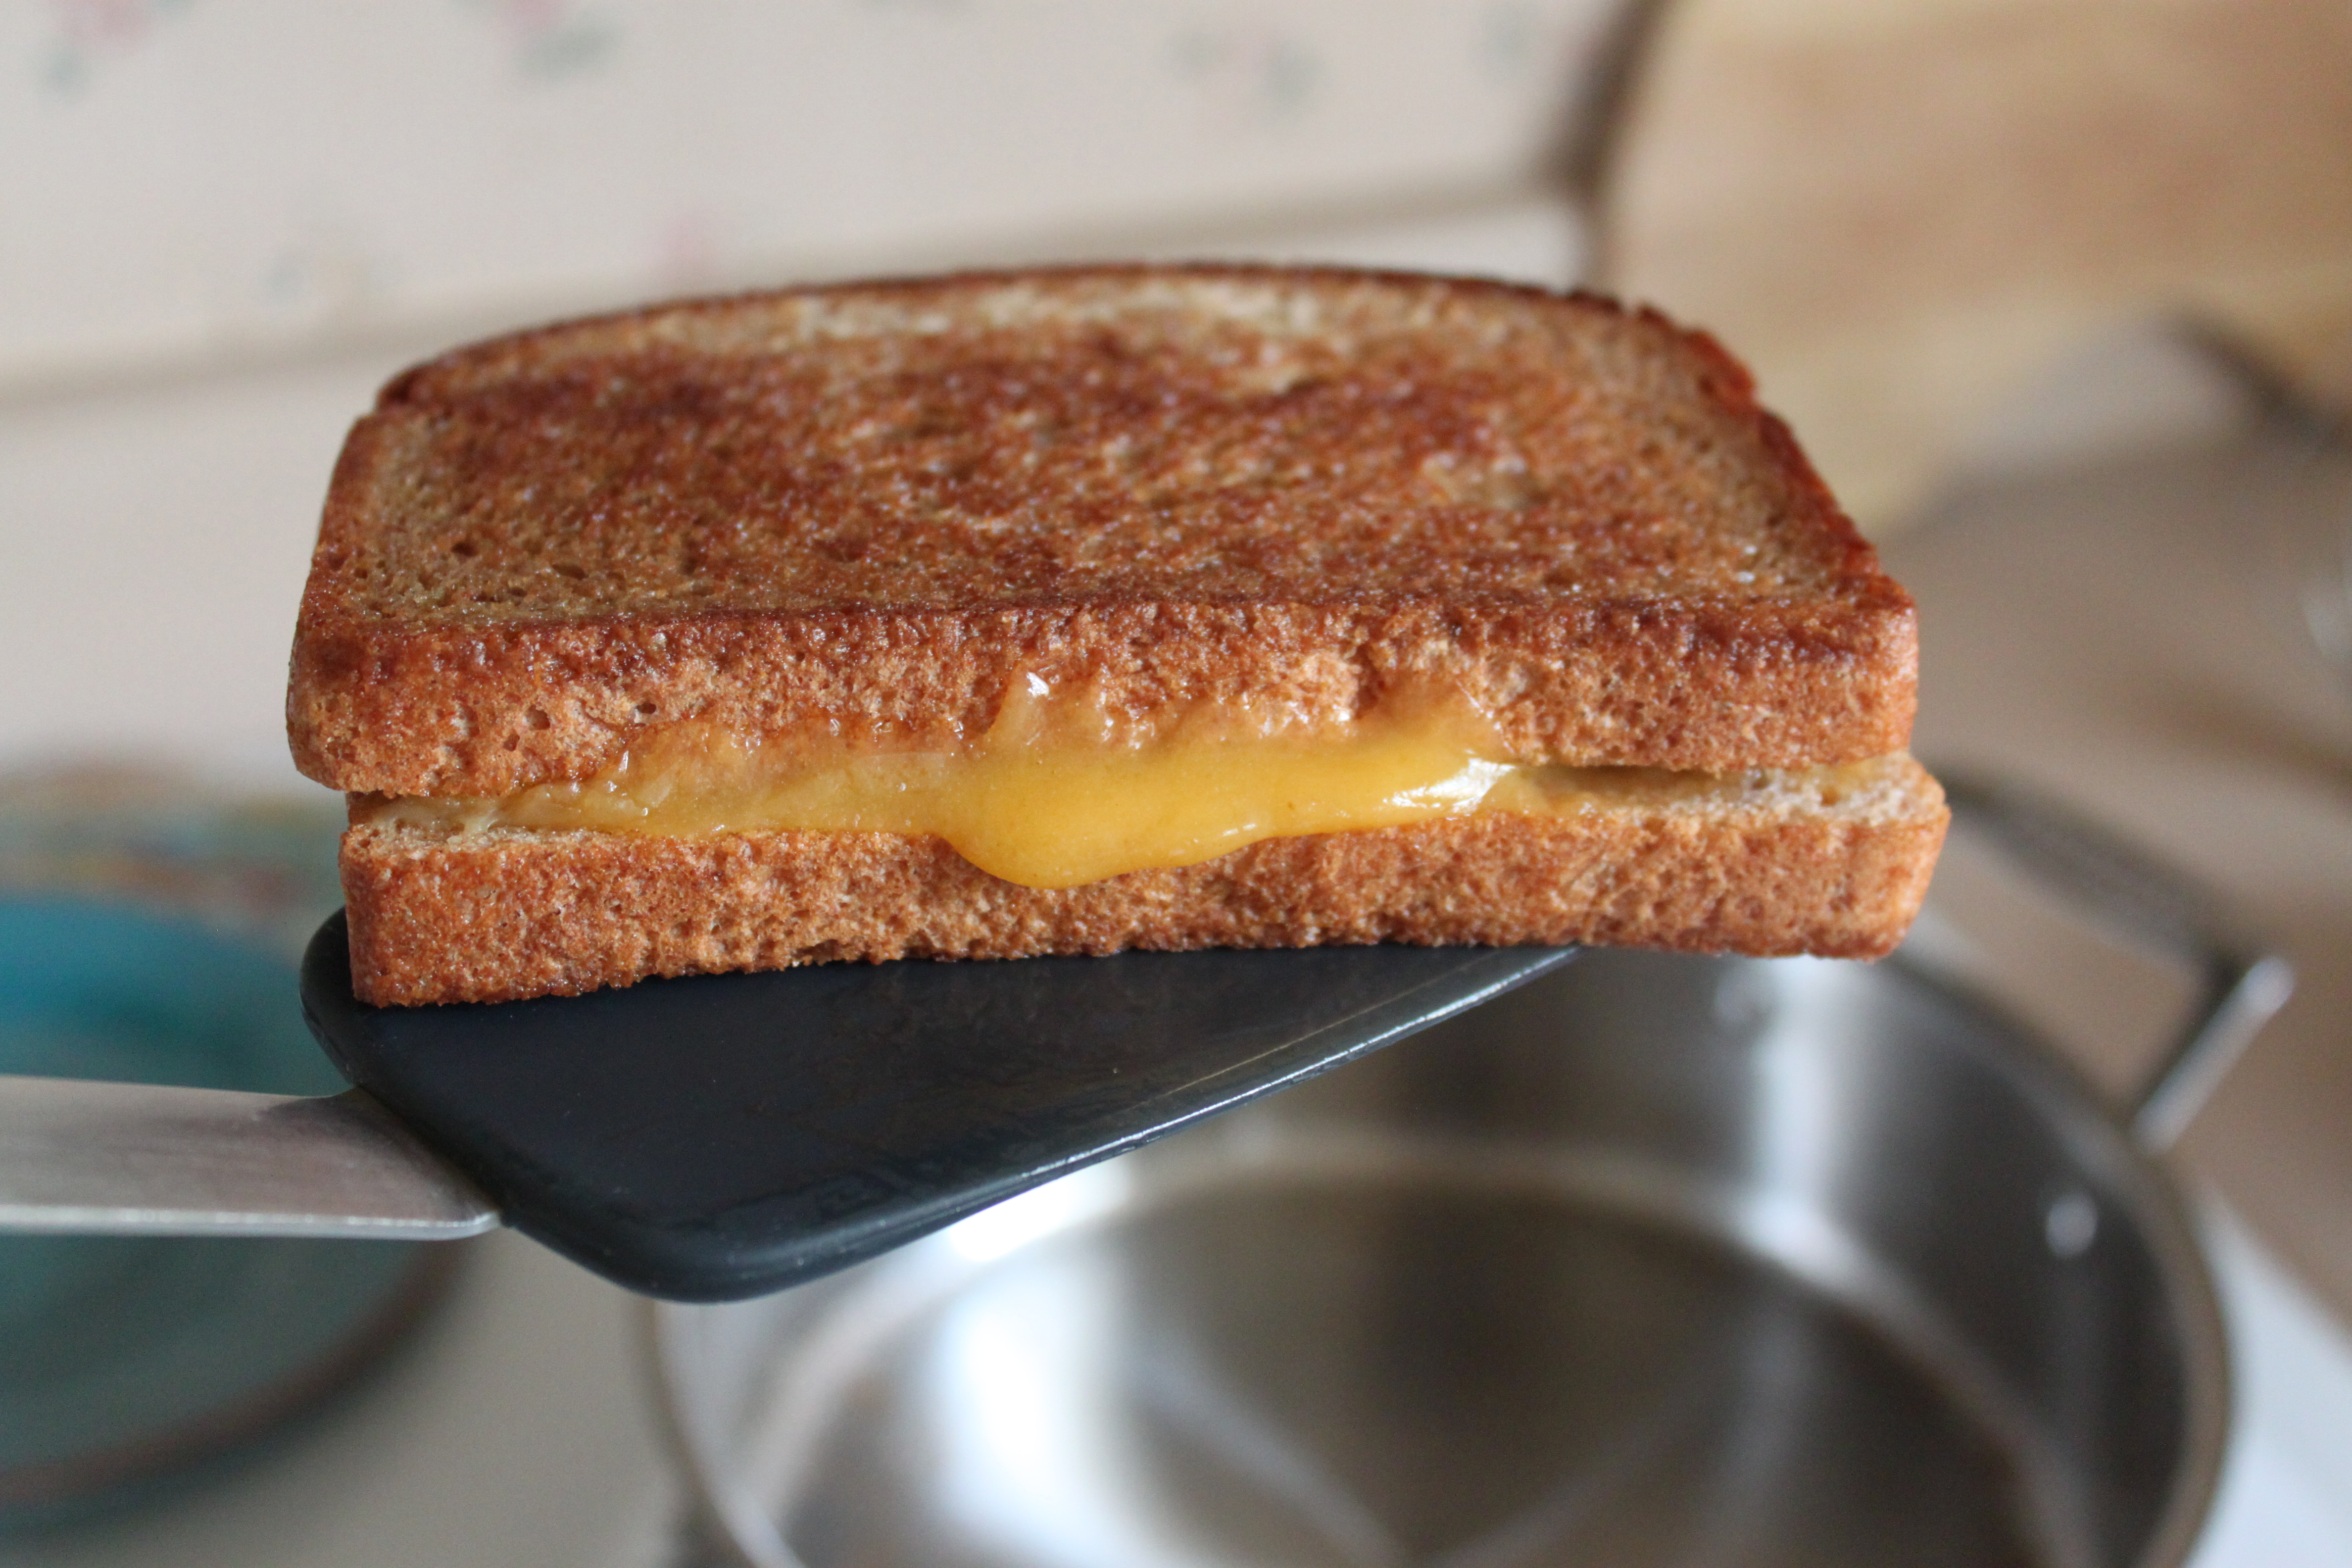 Cook until bread is toasted and cheese is melted